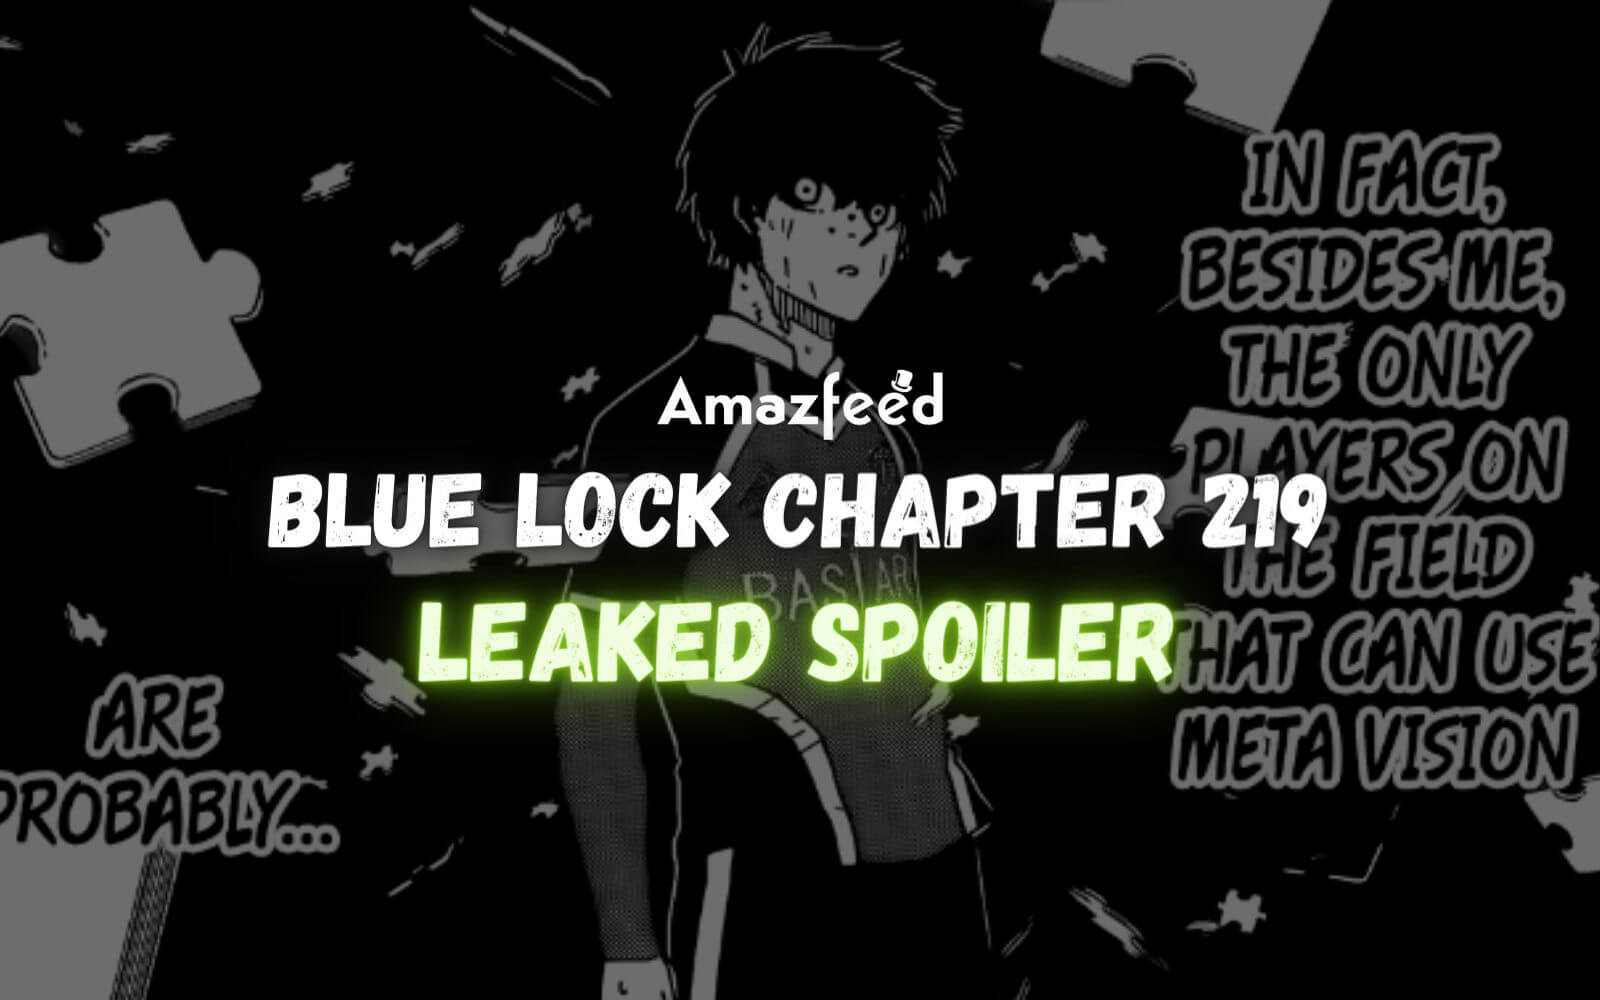 Blue Lock Episode 22  Release Date, Spoiler, Recap, Trailer, Characters,  Countdown, Where to Watch & More » Amazfeed